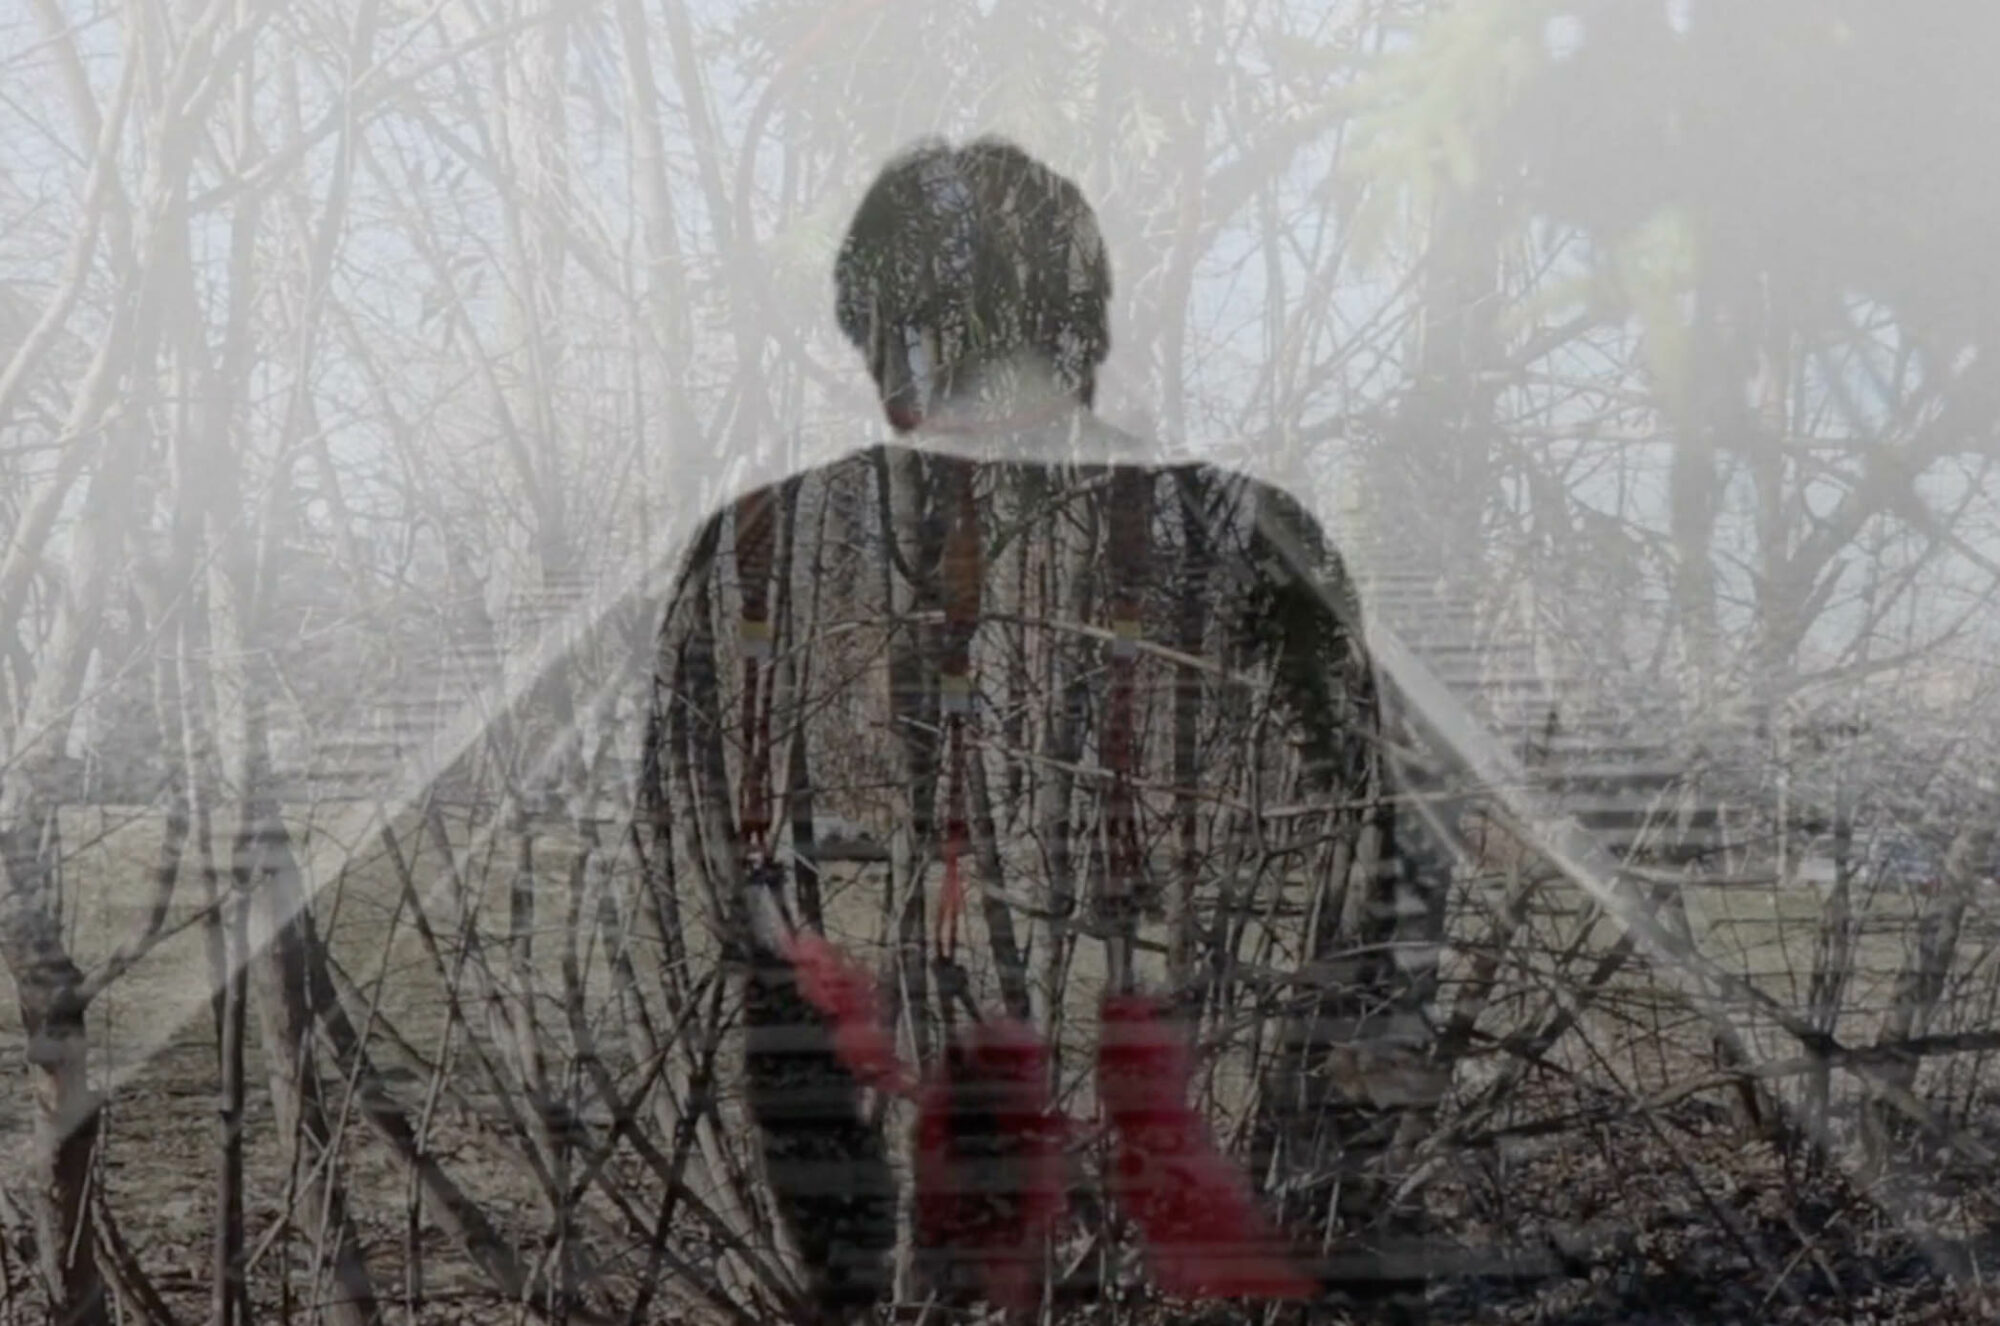 Overlaid images of a person on traintracks, a dreamcatcher, and a background of trees.